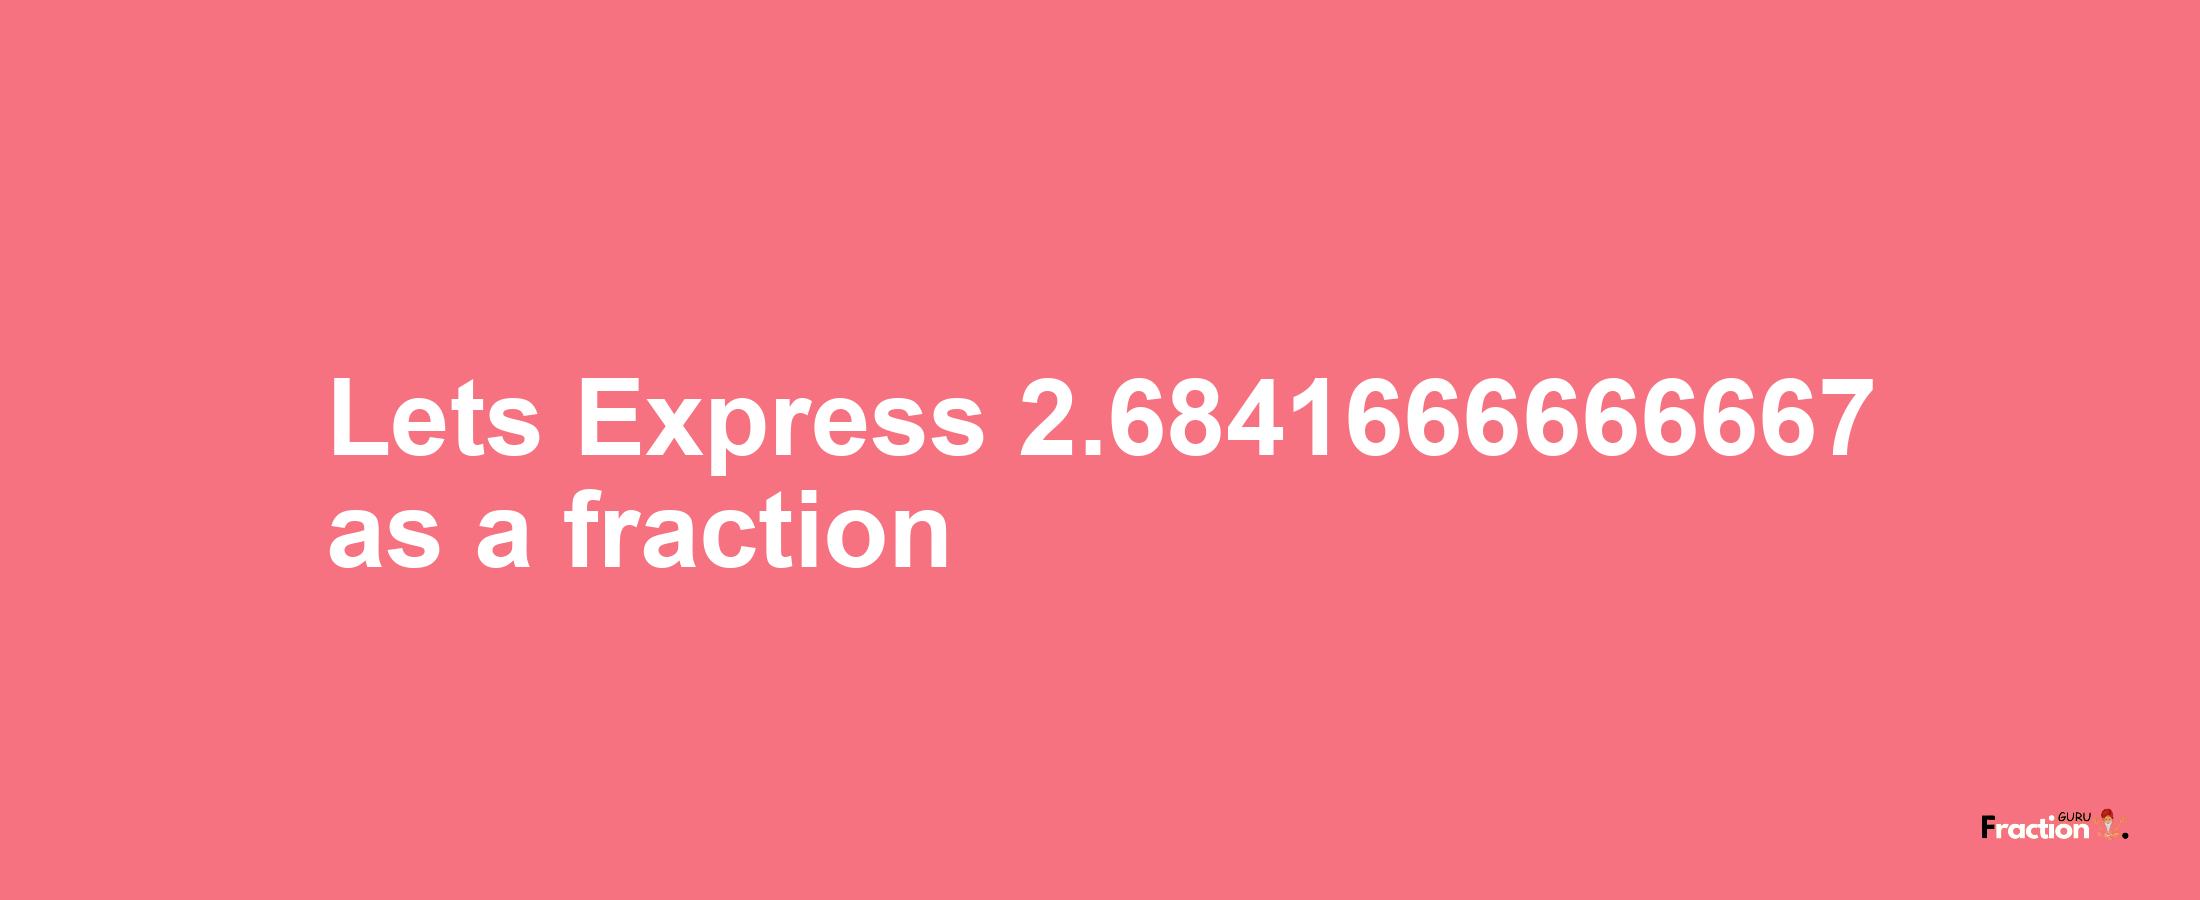 Lets Express 2.6841666666667 as afraction